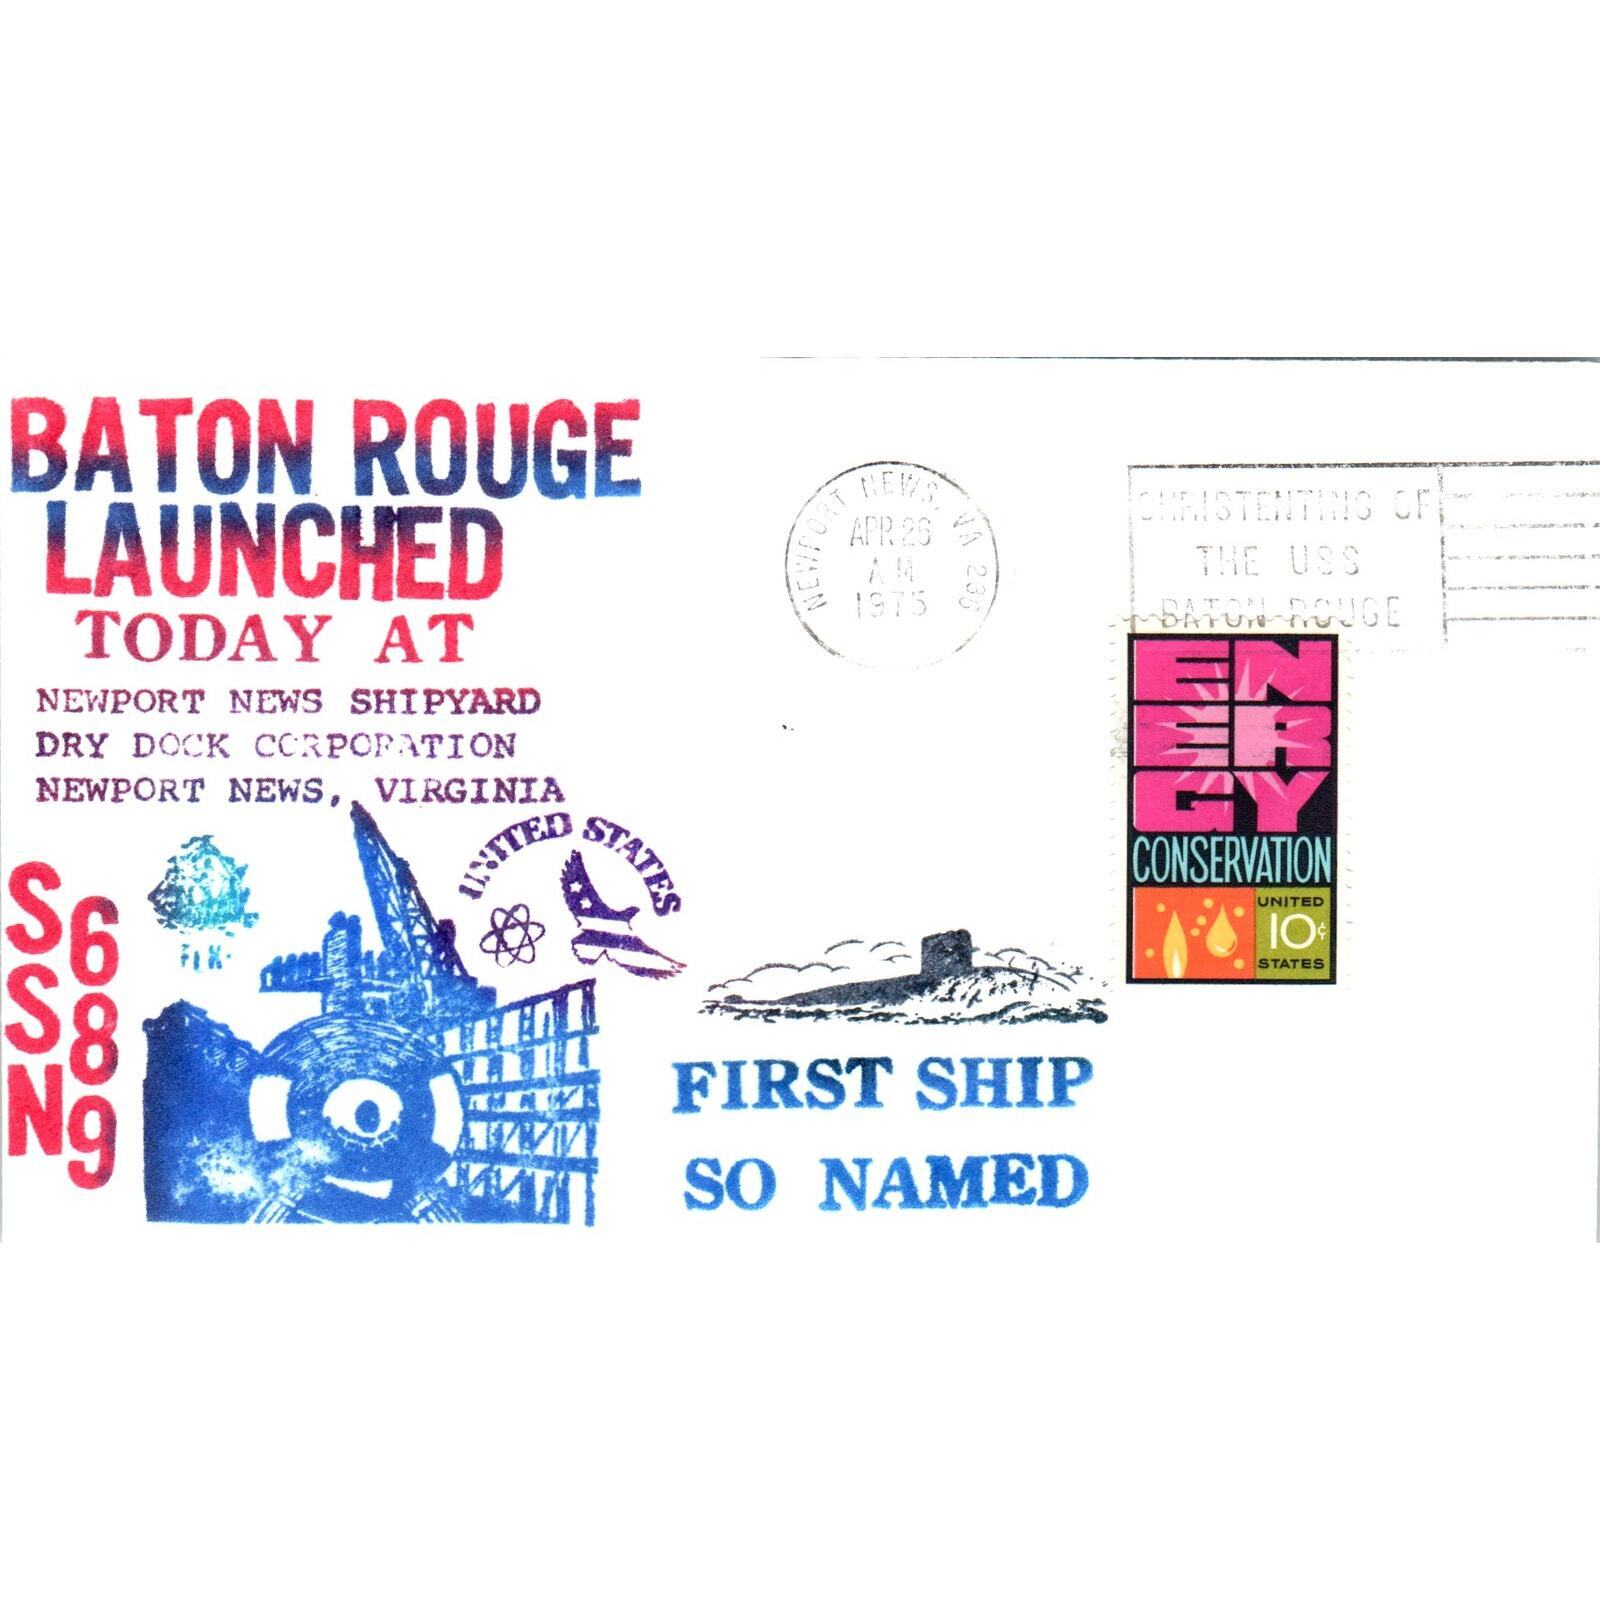 1975 Baton Rouge Nuclear Sub Launched Today Newport News Postal Cover TI5-PC1